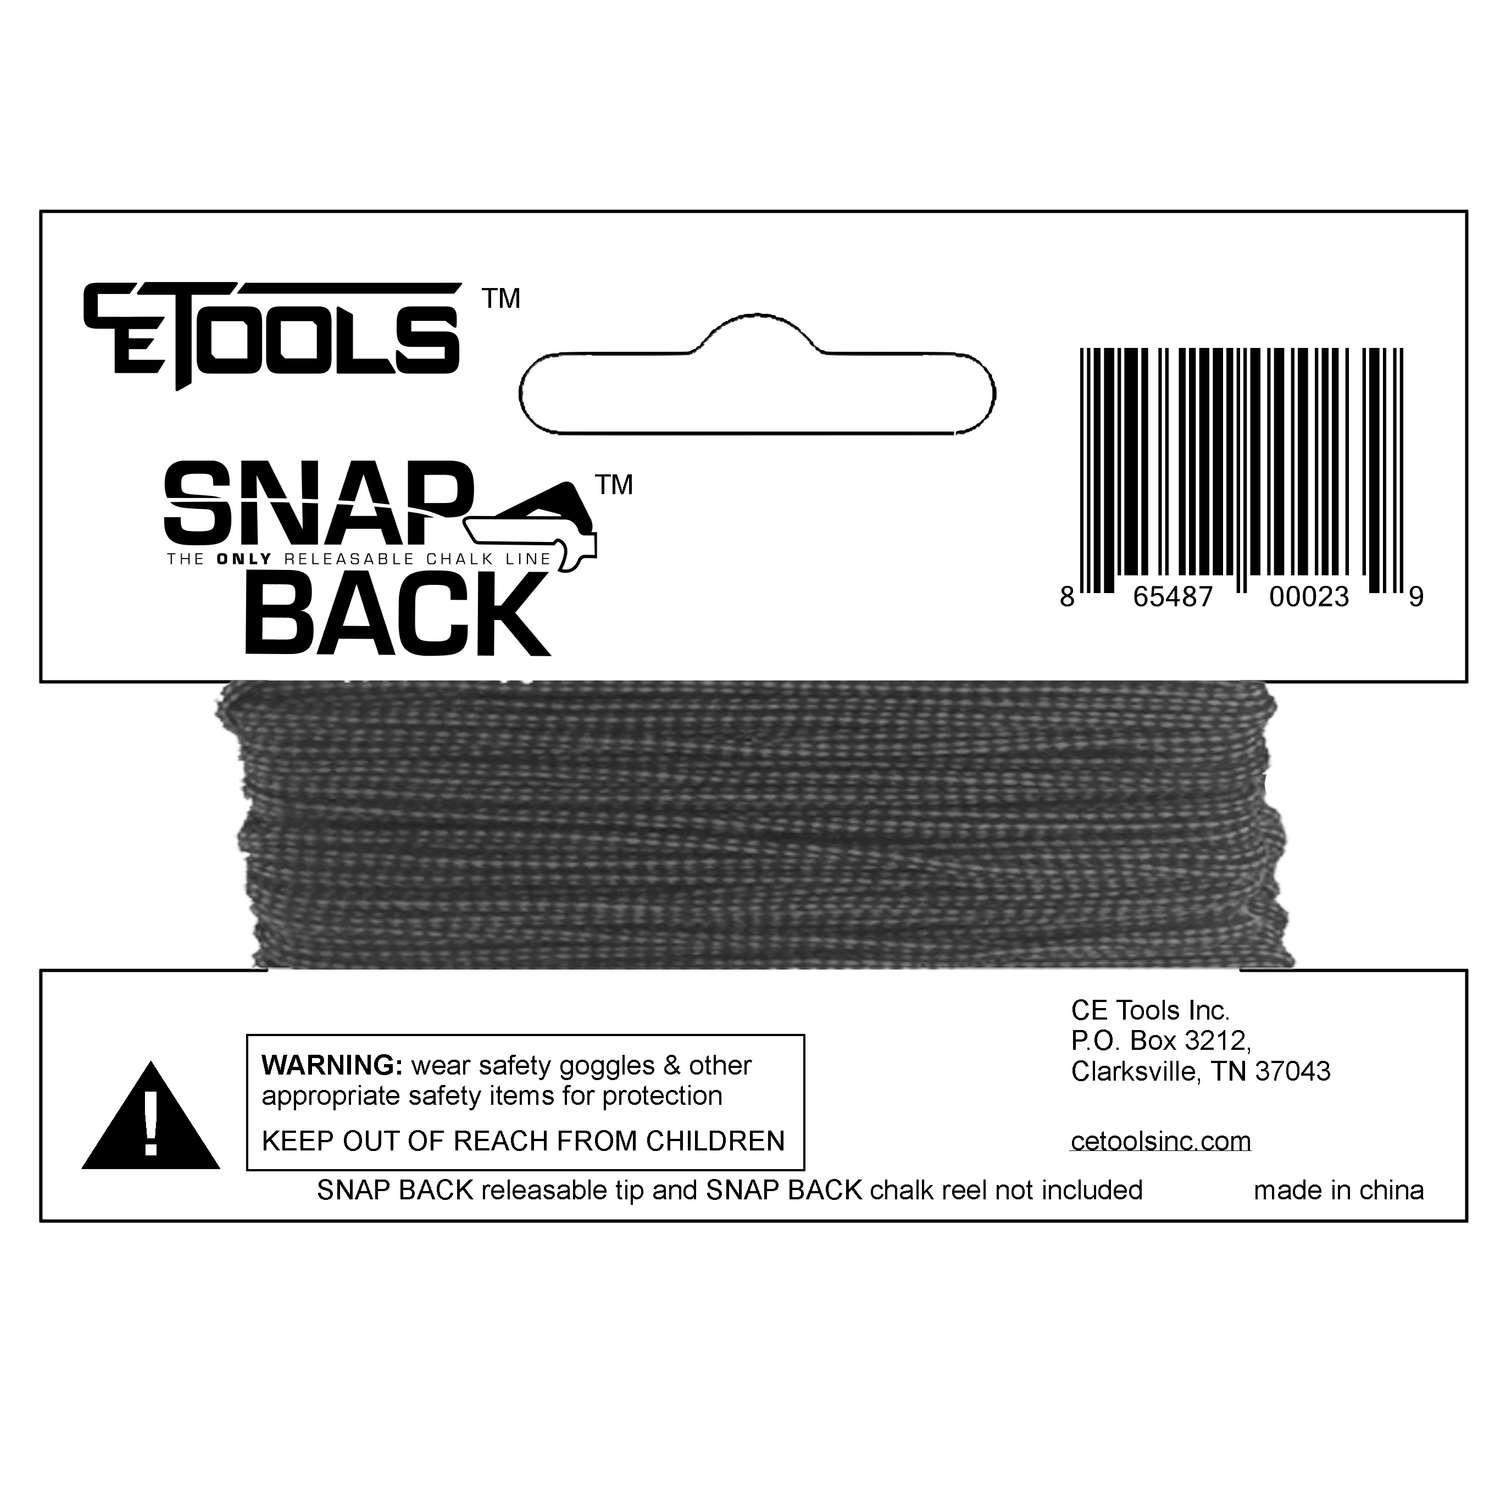 CE Tools - CET105 - Snapback Braided Replacement Chalk String 50 ft.